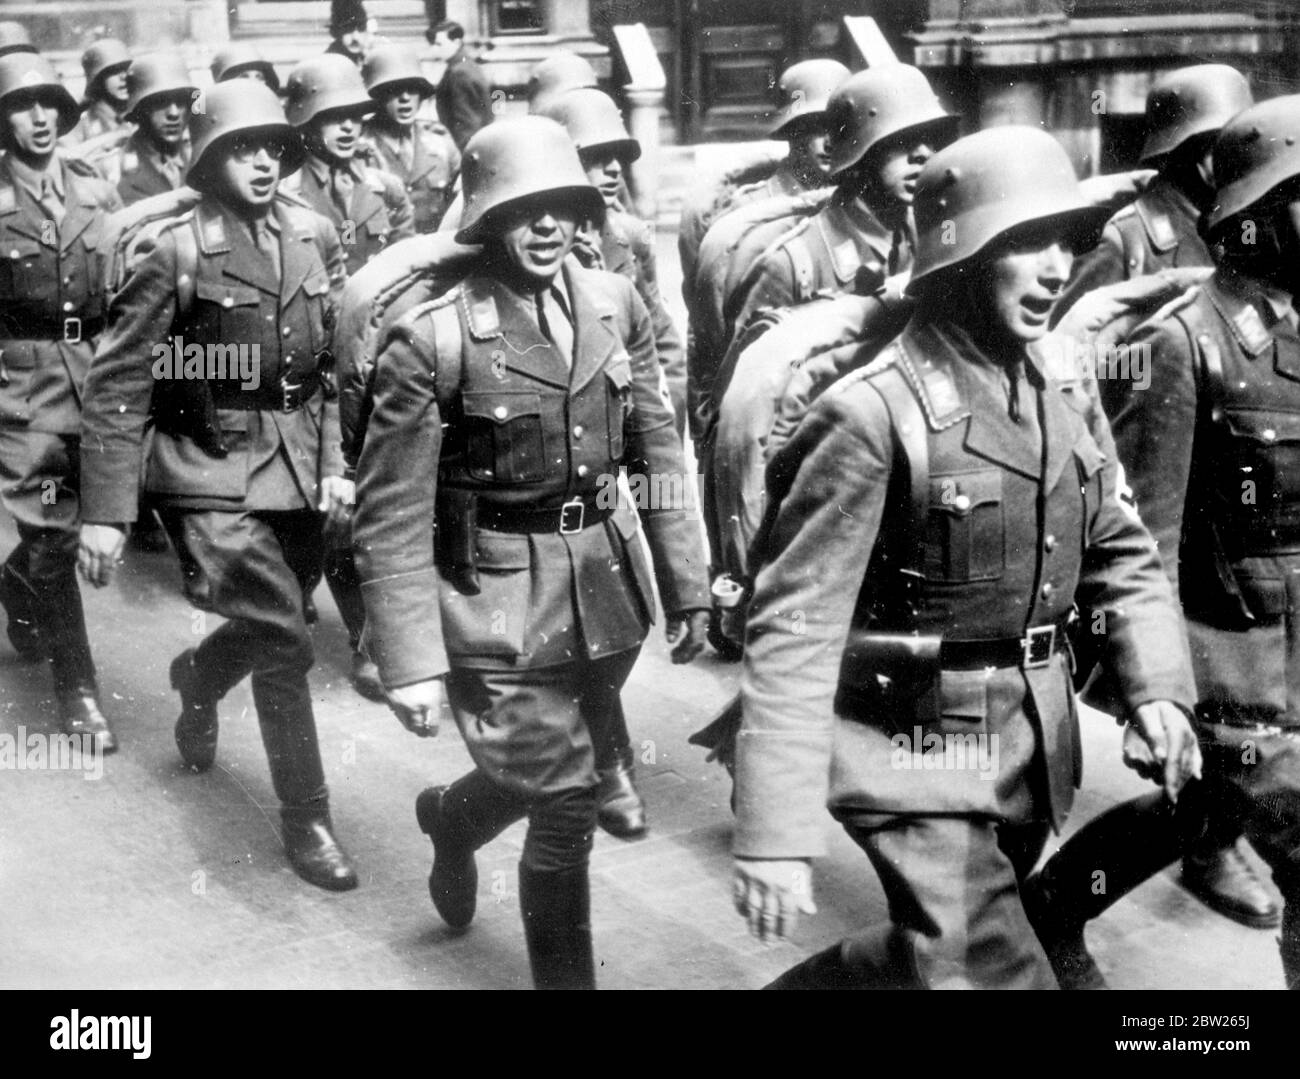 Austrian Legion features in triumph to Vienna. Returning in triumph to their homeland after years of exile, the first detachments of the Austrian Legion marched through Vienna in steel helmets and Nazi uniforms. The Legion consist of Austrian Nazis who had sought refuge in Germany before the annexation of Austria by Germany. Photo shows, the Austrian legionnaires singing as they marched through Vienna on their return. 28 March 1938 Stock Photo